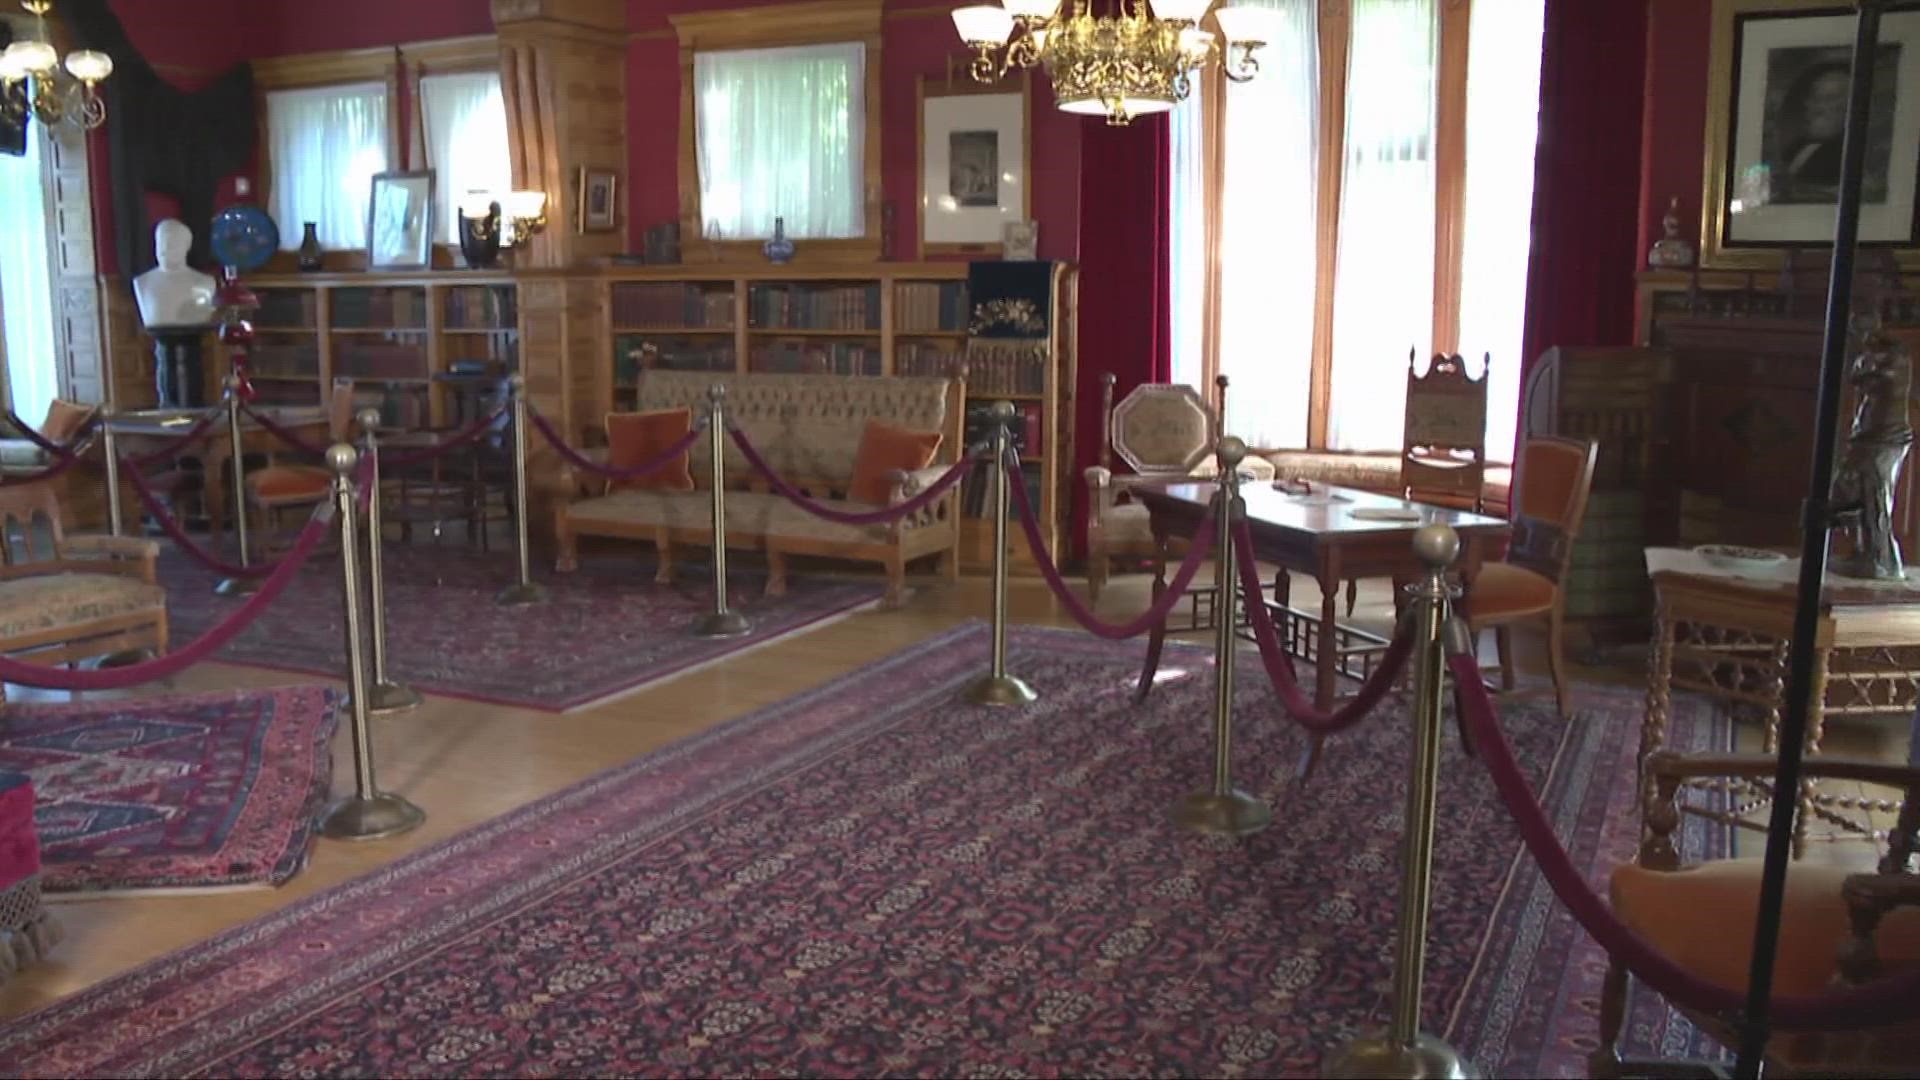 While James A. Garfield may not have served as President for long, he and his family left a lasting legacy in their home in Mentor